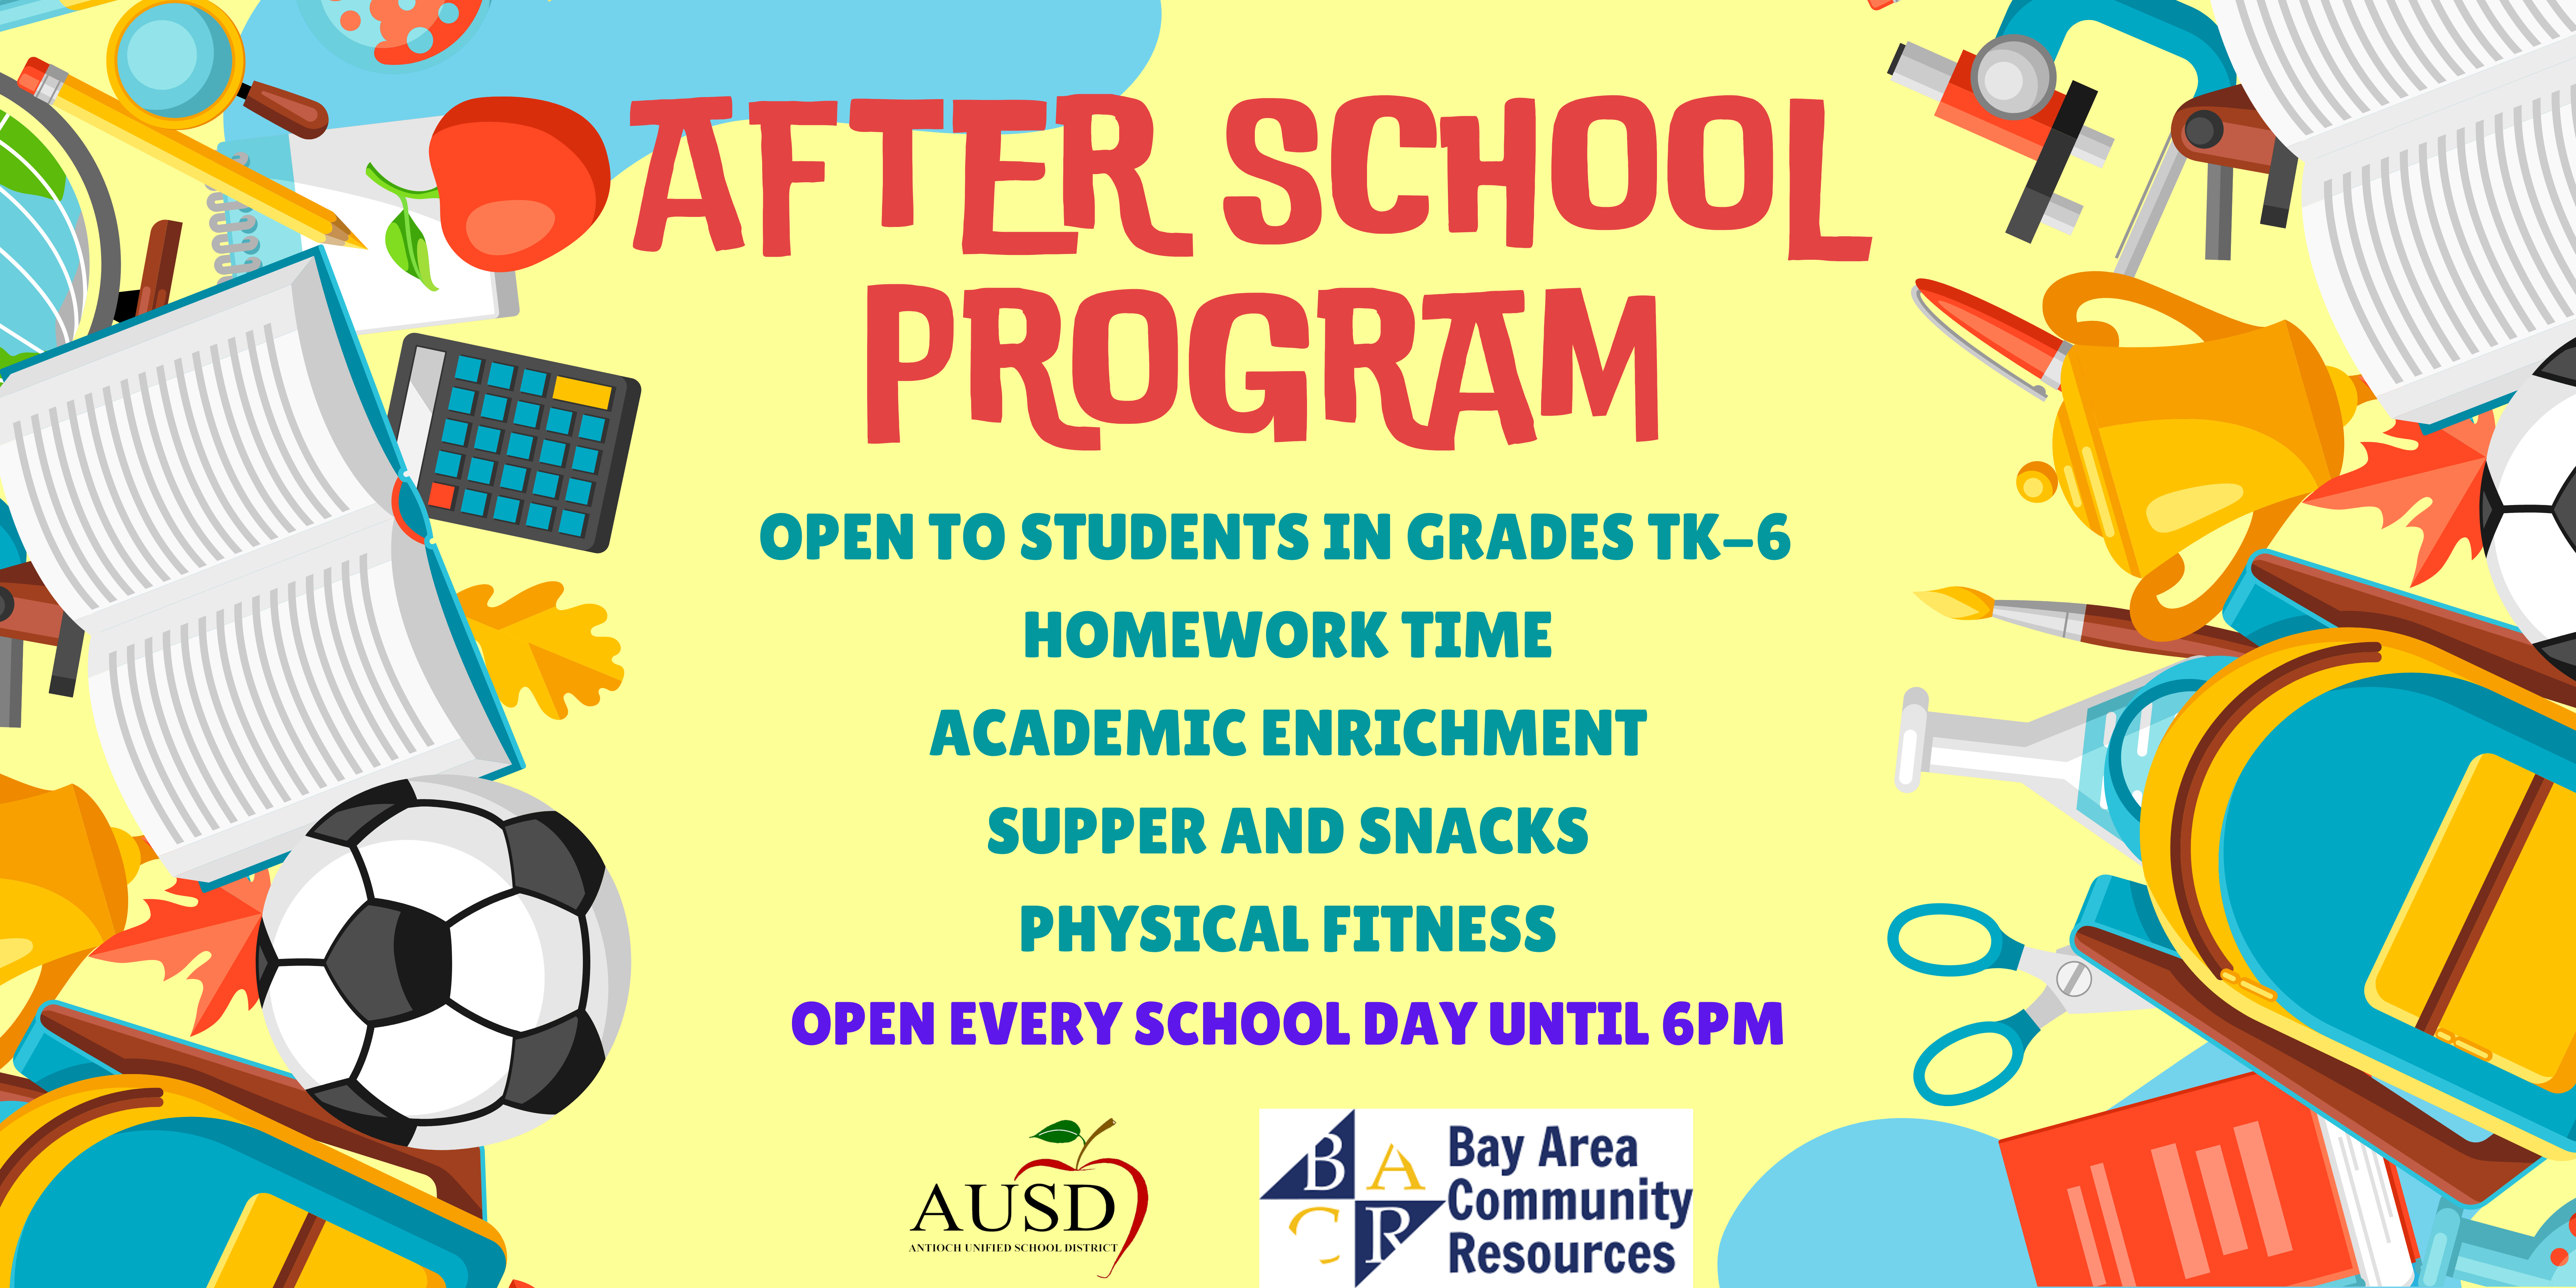 After School Programs Banner - open every school day until 6pm